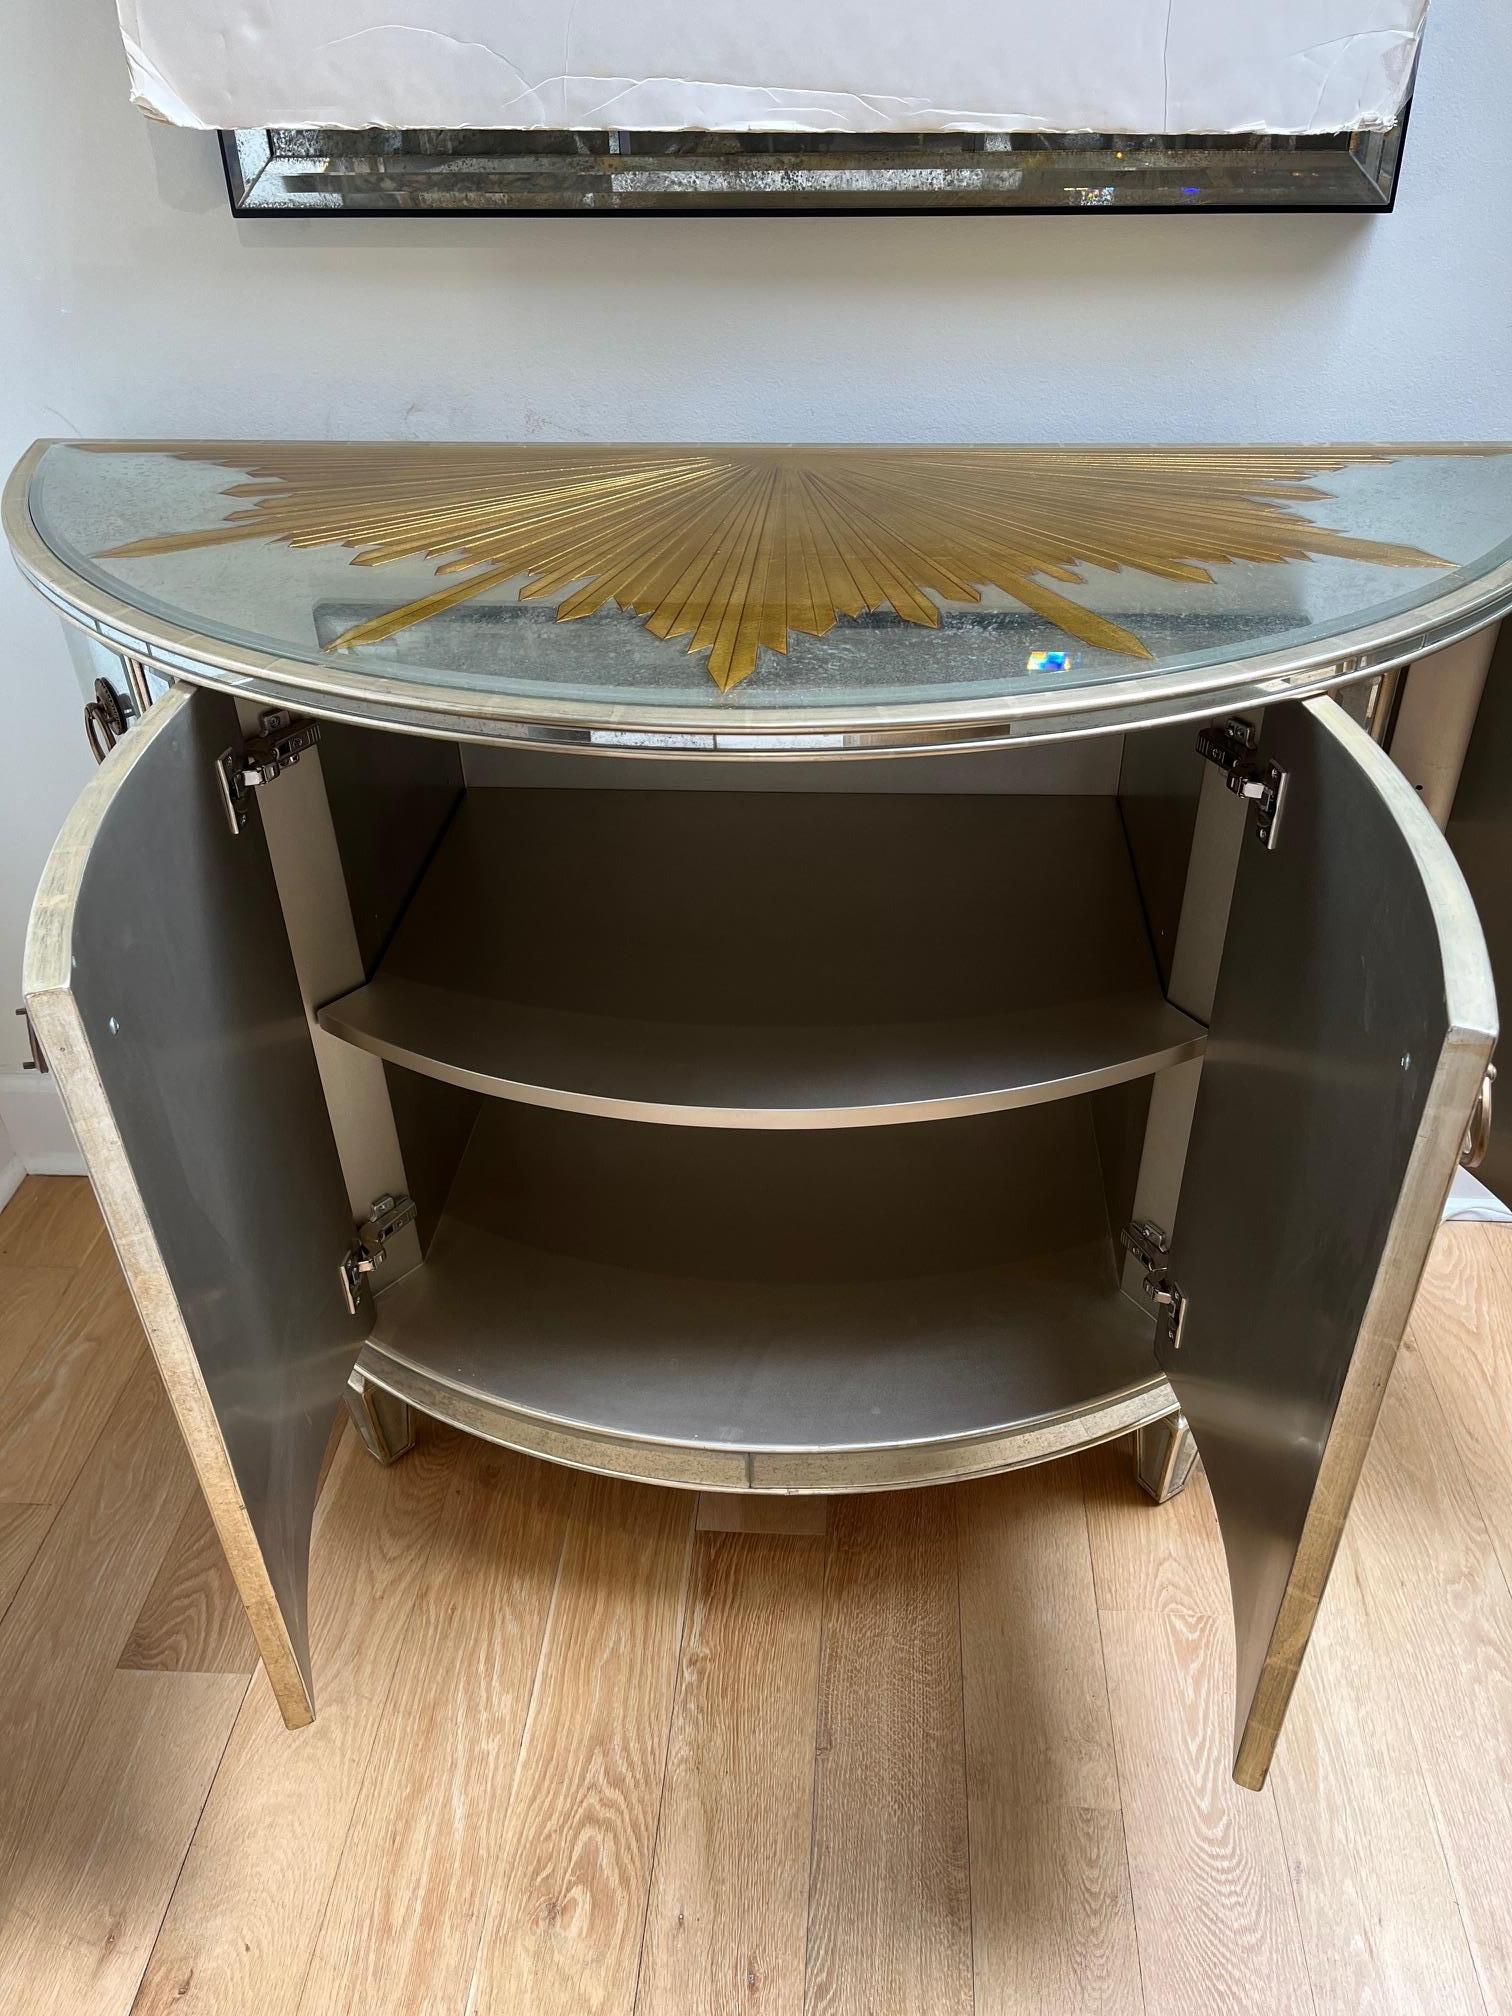 21st Century Pre-owned Picturesque Mirrored Carved Demi-Lune Console with Starburst Gilded Etched Element, Featuring Mirrored front four swing open Doors in 12kt White Gold Finish, a Pair in Stock.